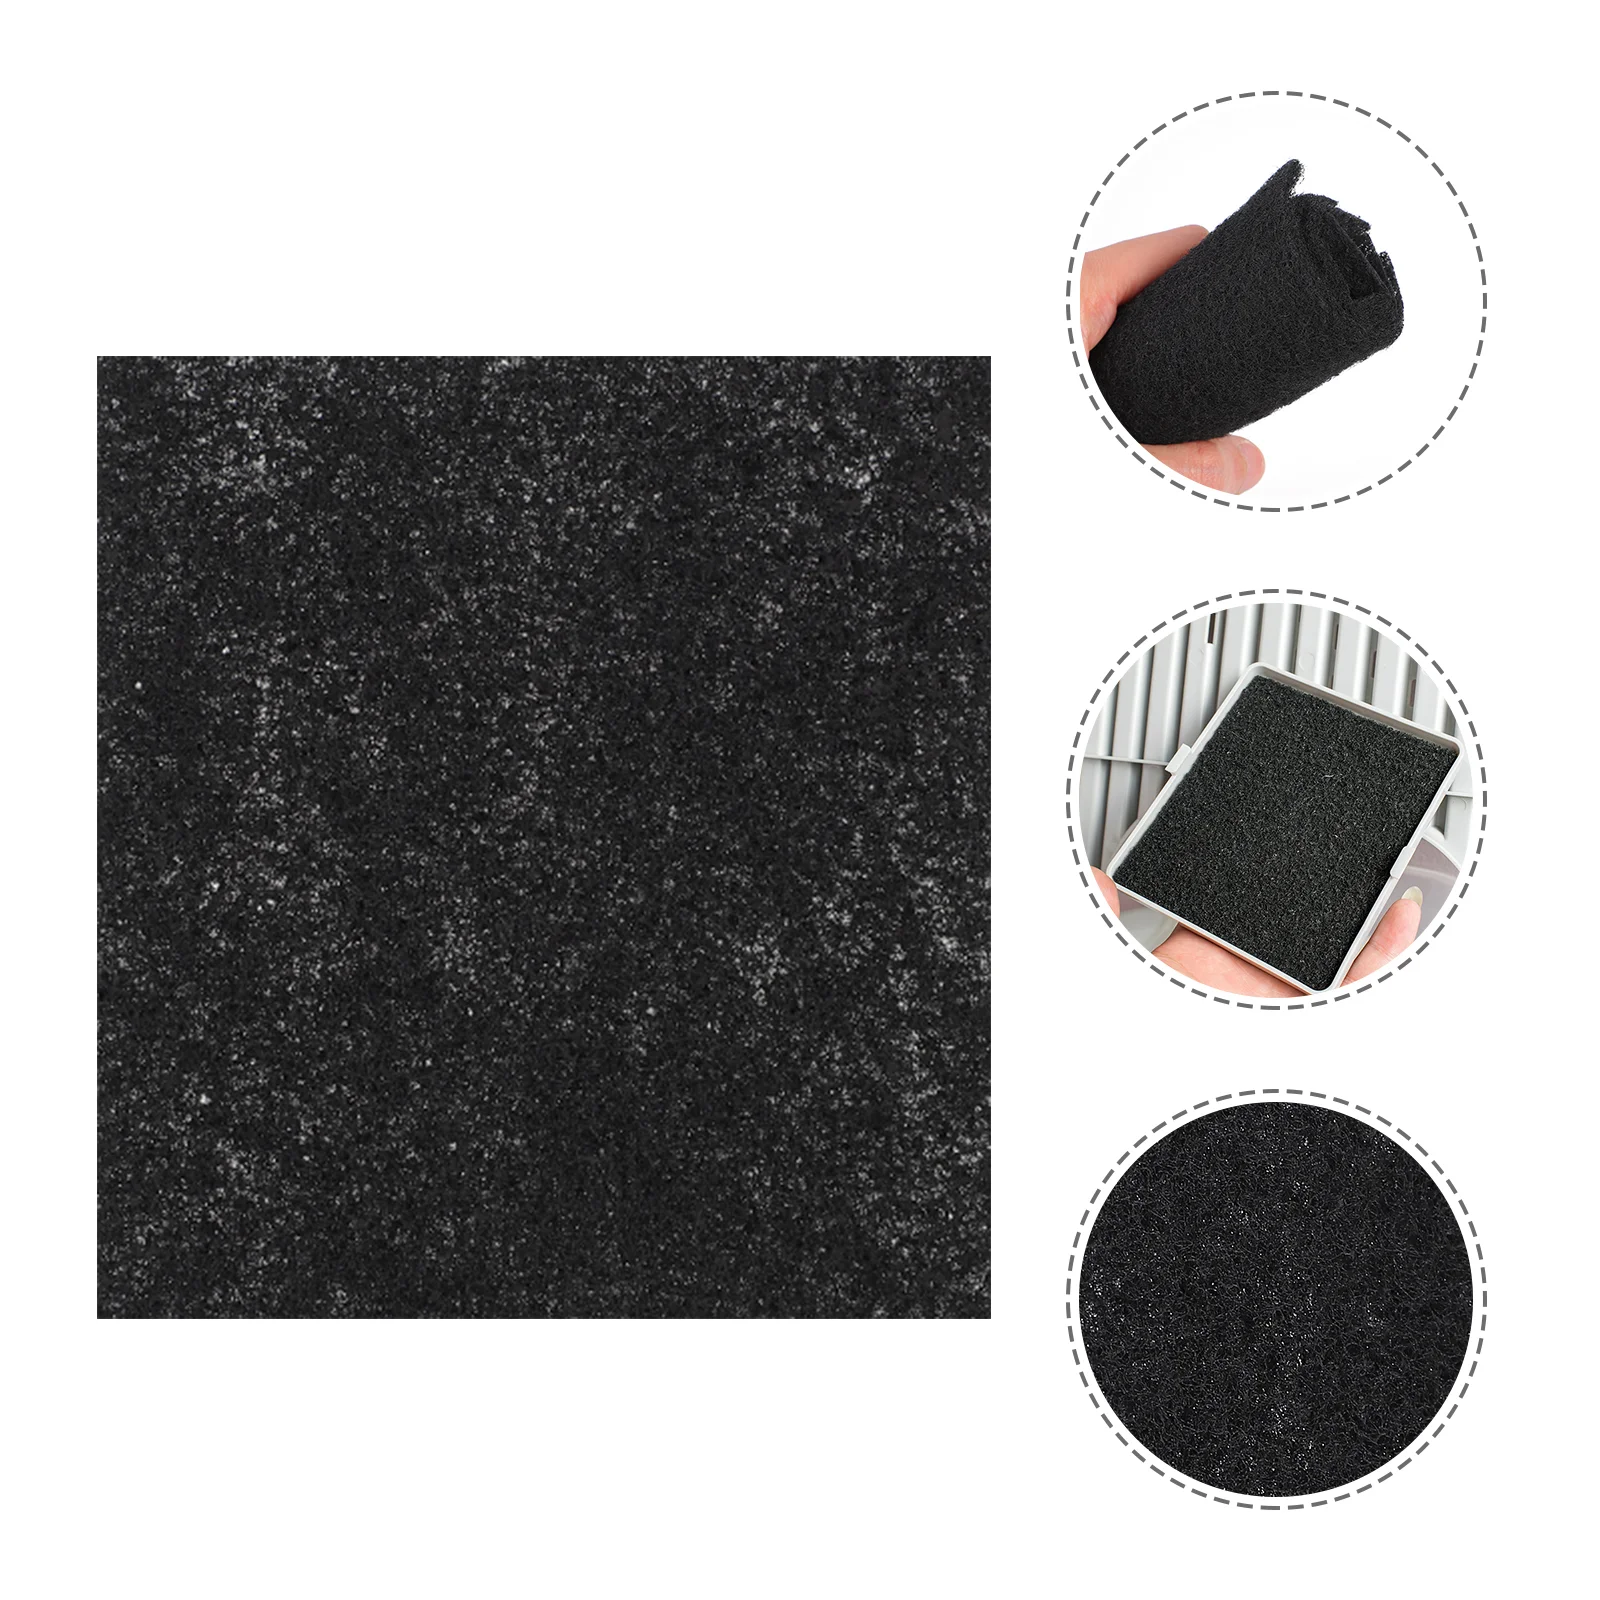 

24 Pcs Trashcan Lid Cat Deodorant Tablets Activated Carbon Deodorizing Mat Litter Remover Filter Tray Charcoal Pad Replacements